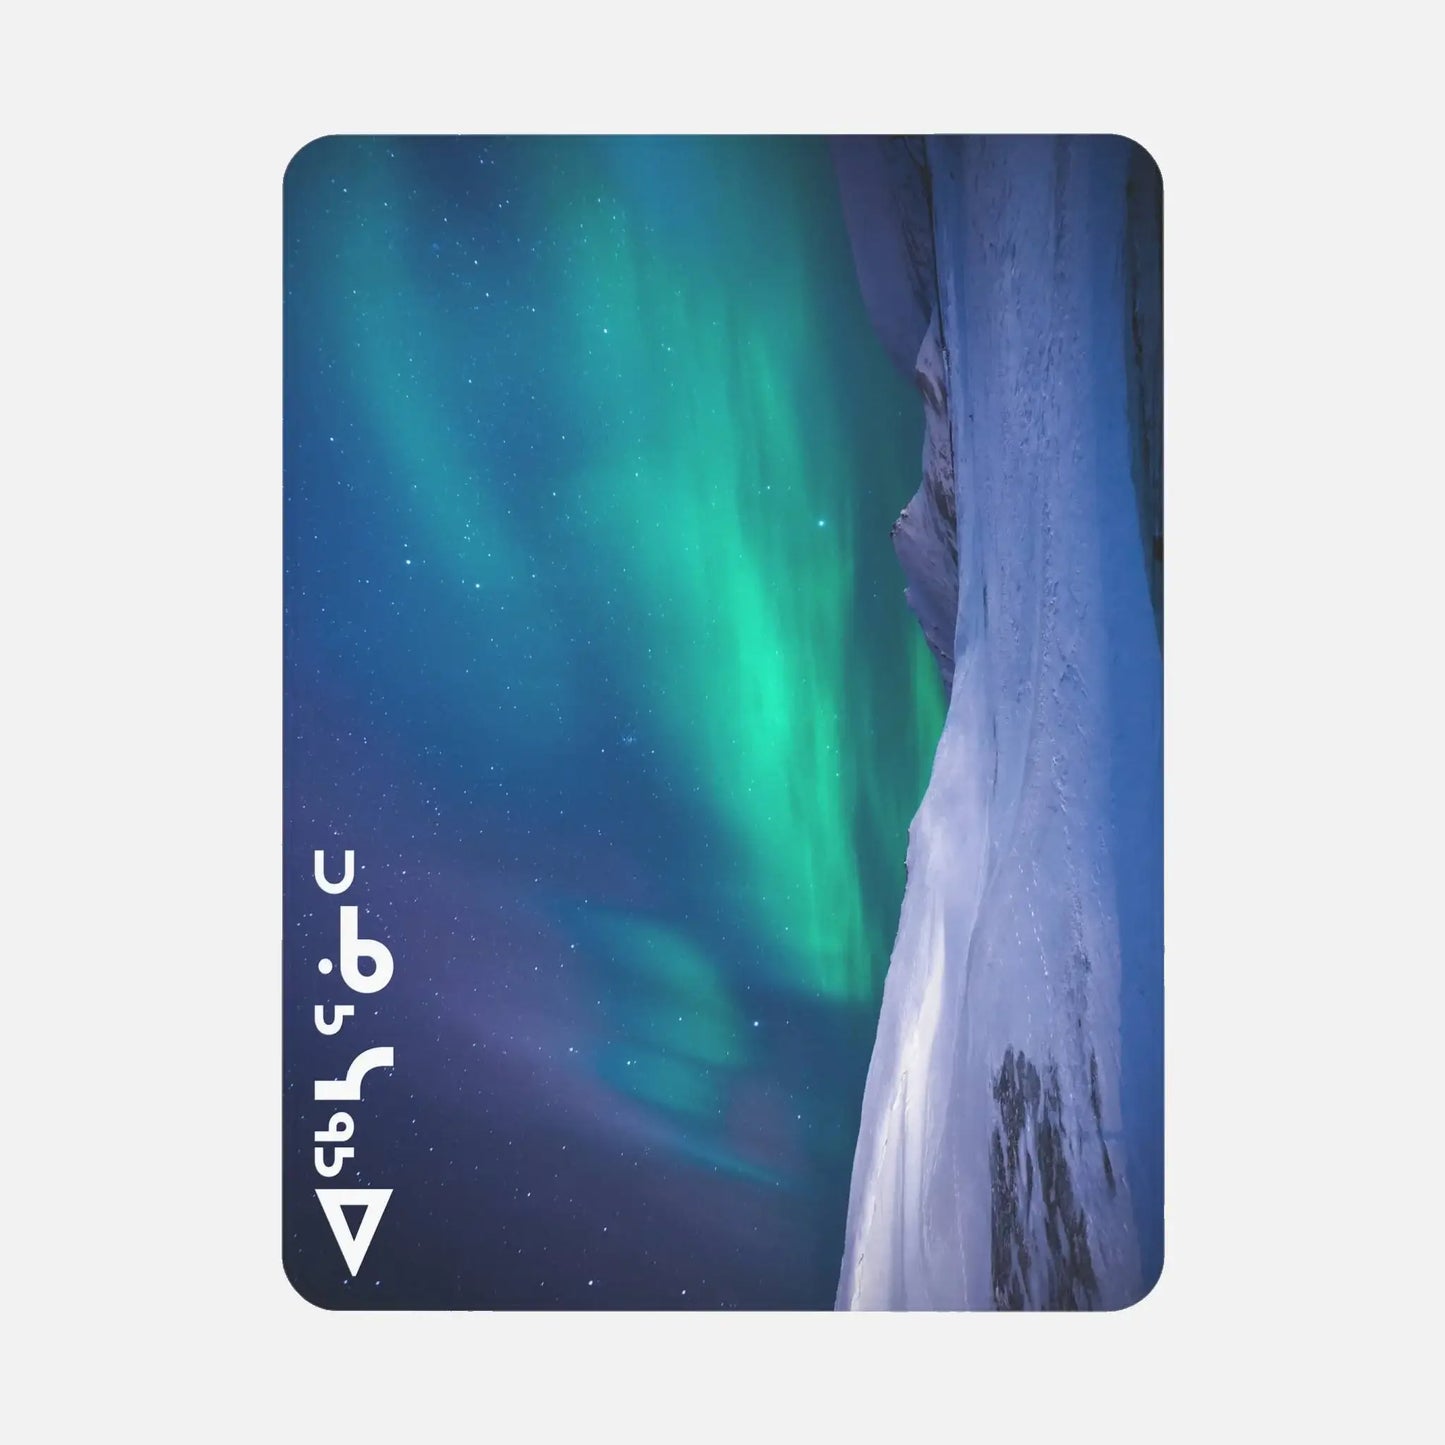 ᐊᖅᓴᕐᓃᑦ (Football Players) Northern Lights Toddler Blanket